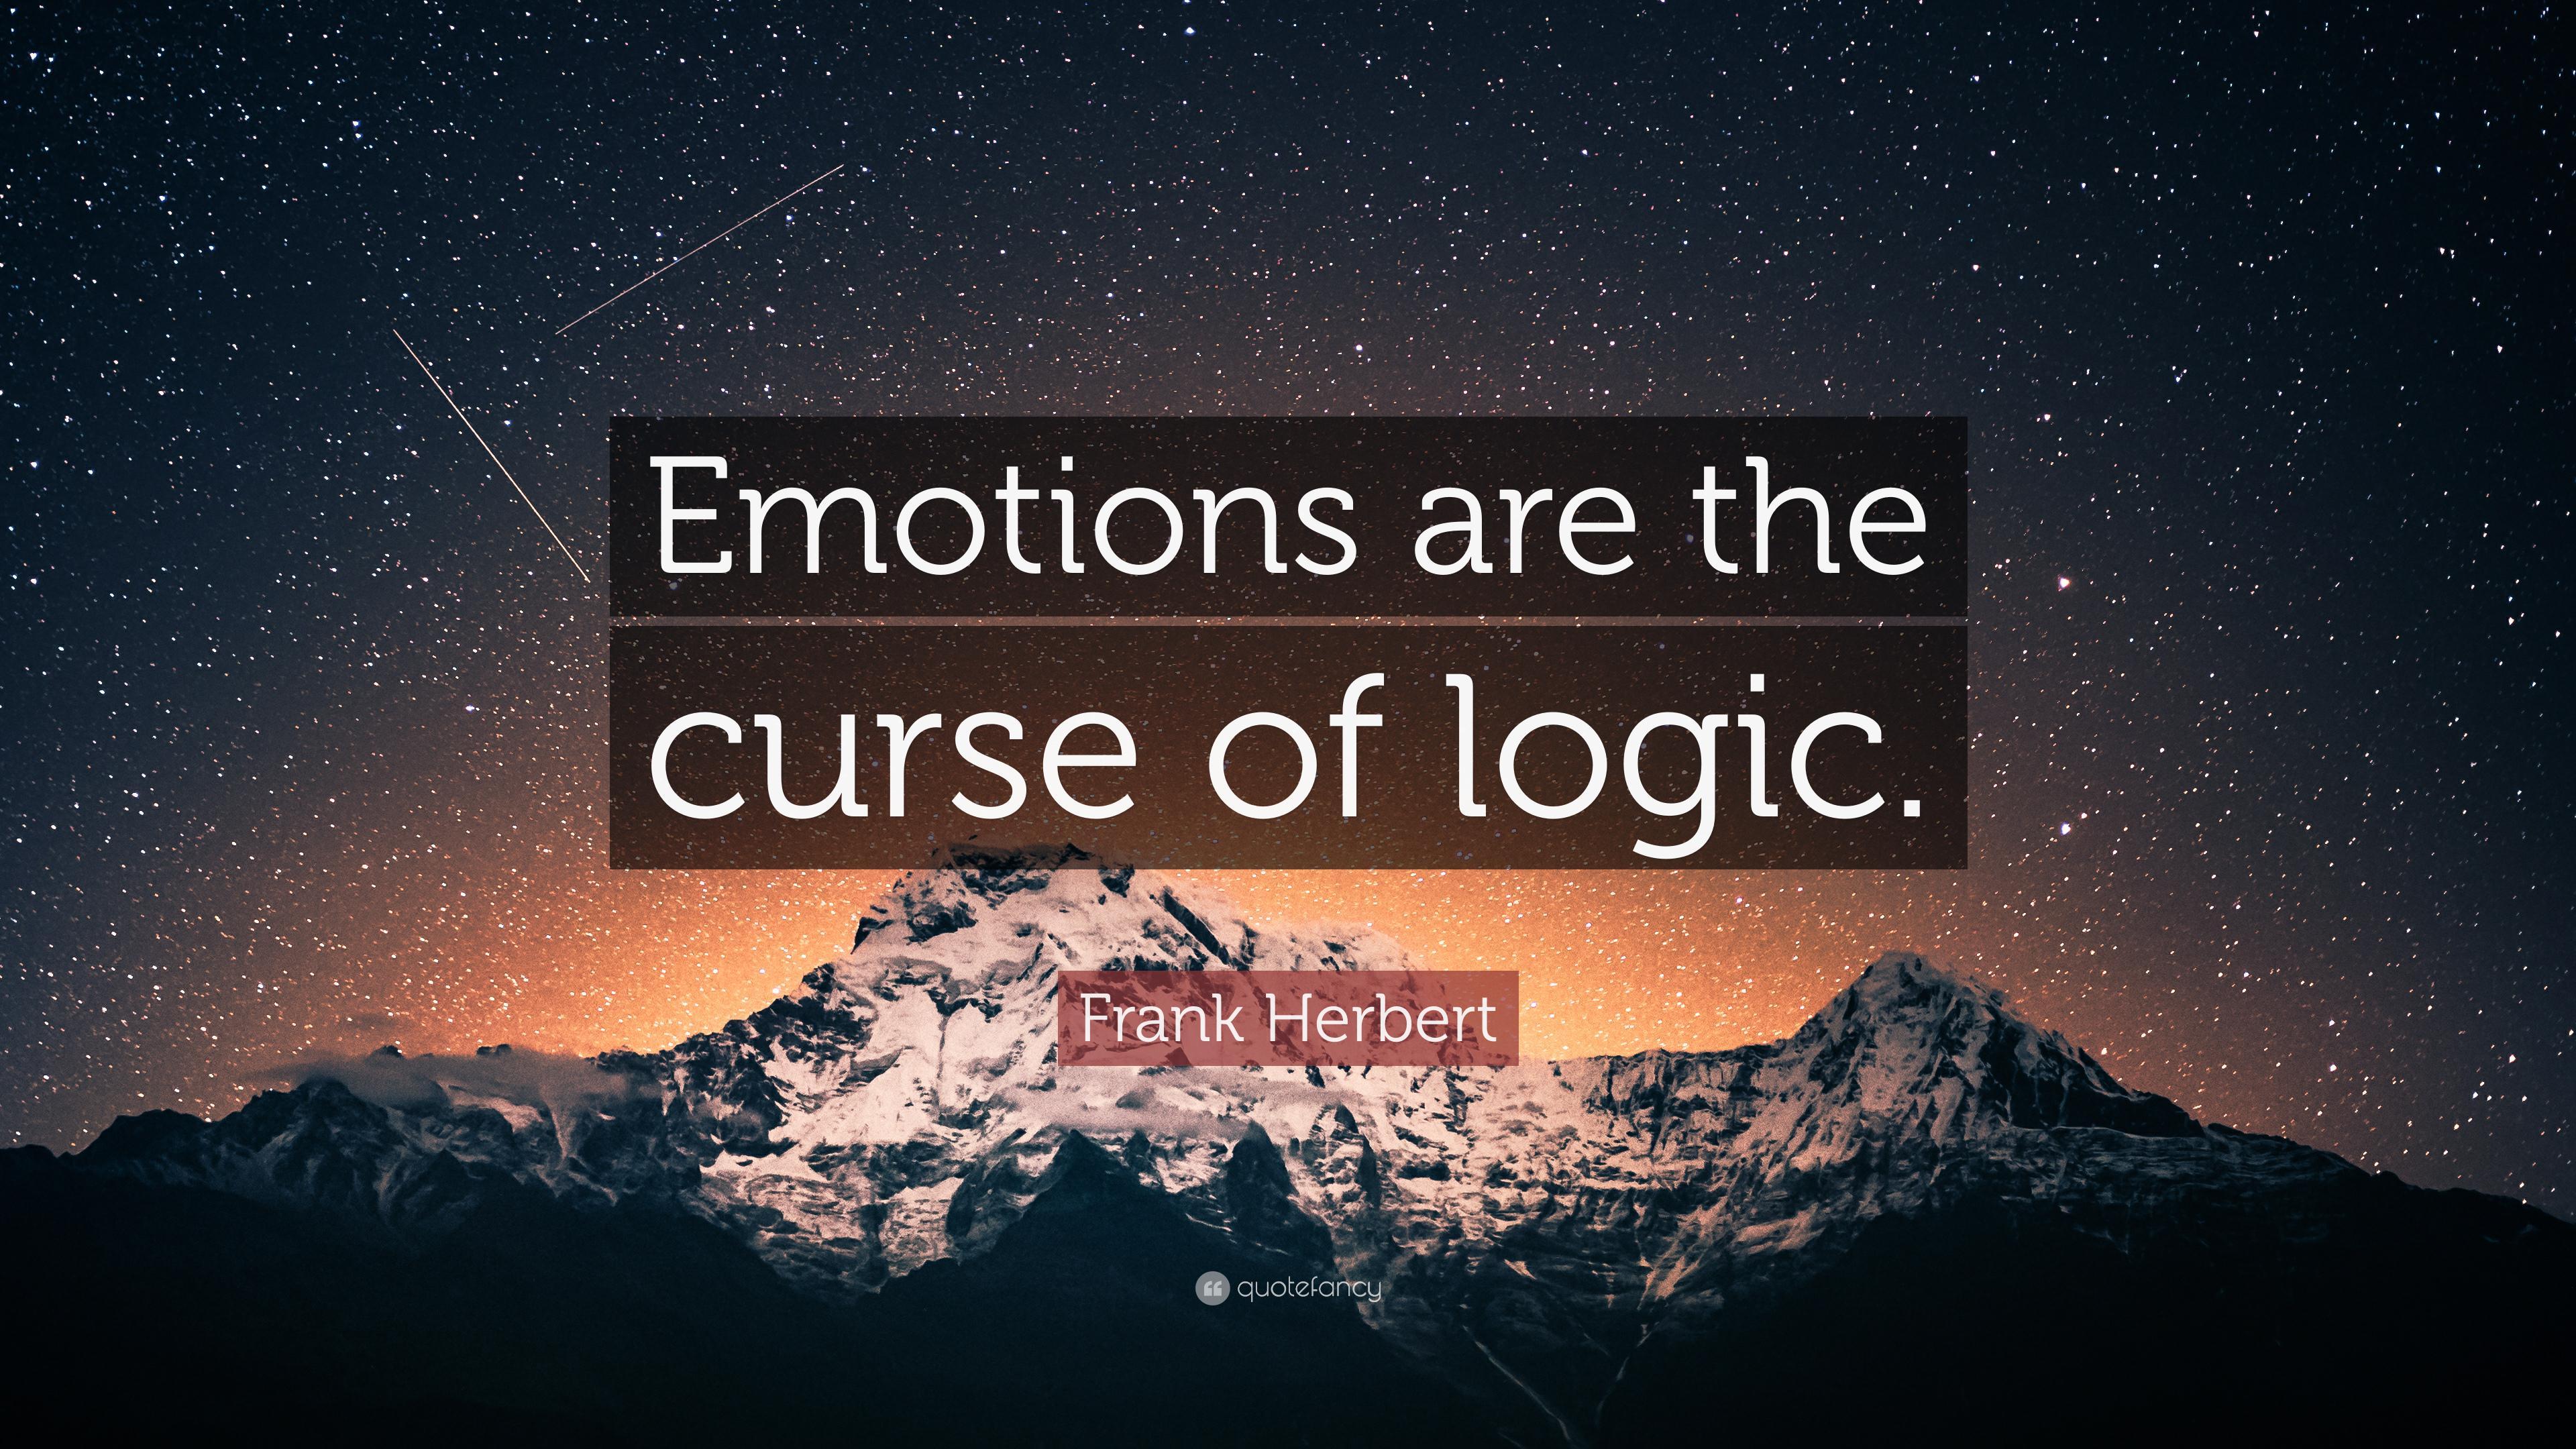 Frank Herbert Quote: “Emotions are the curse of logic.” 9